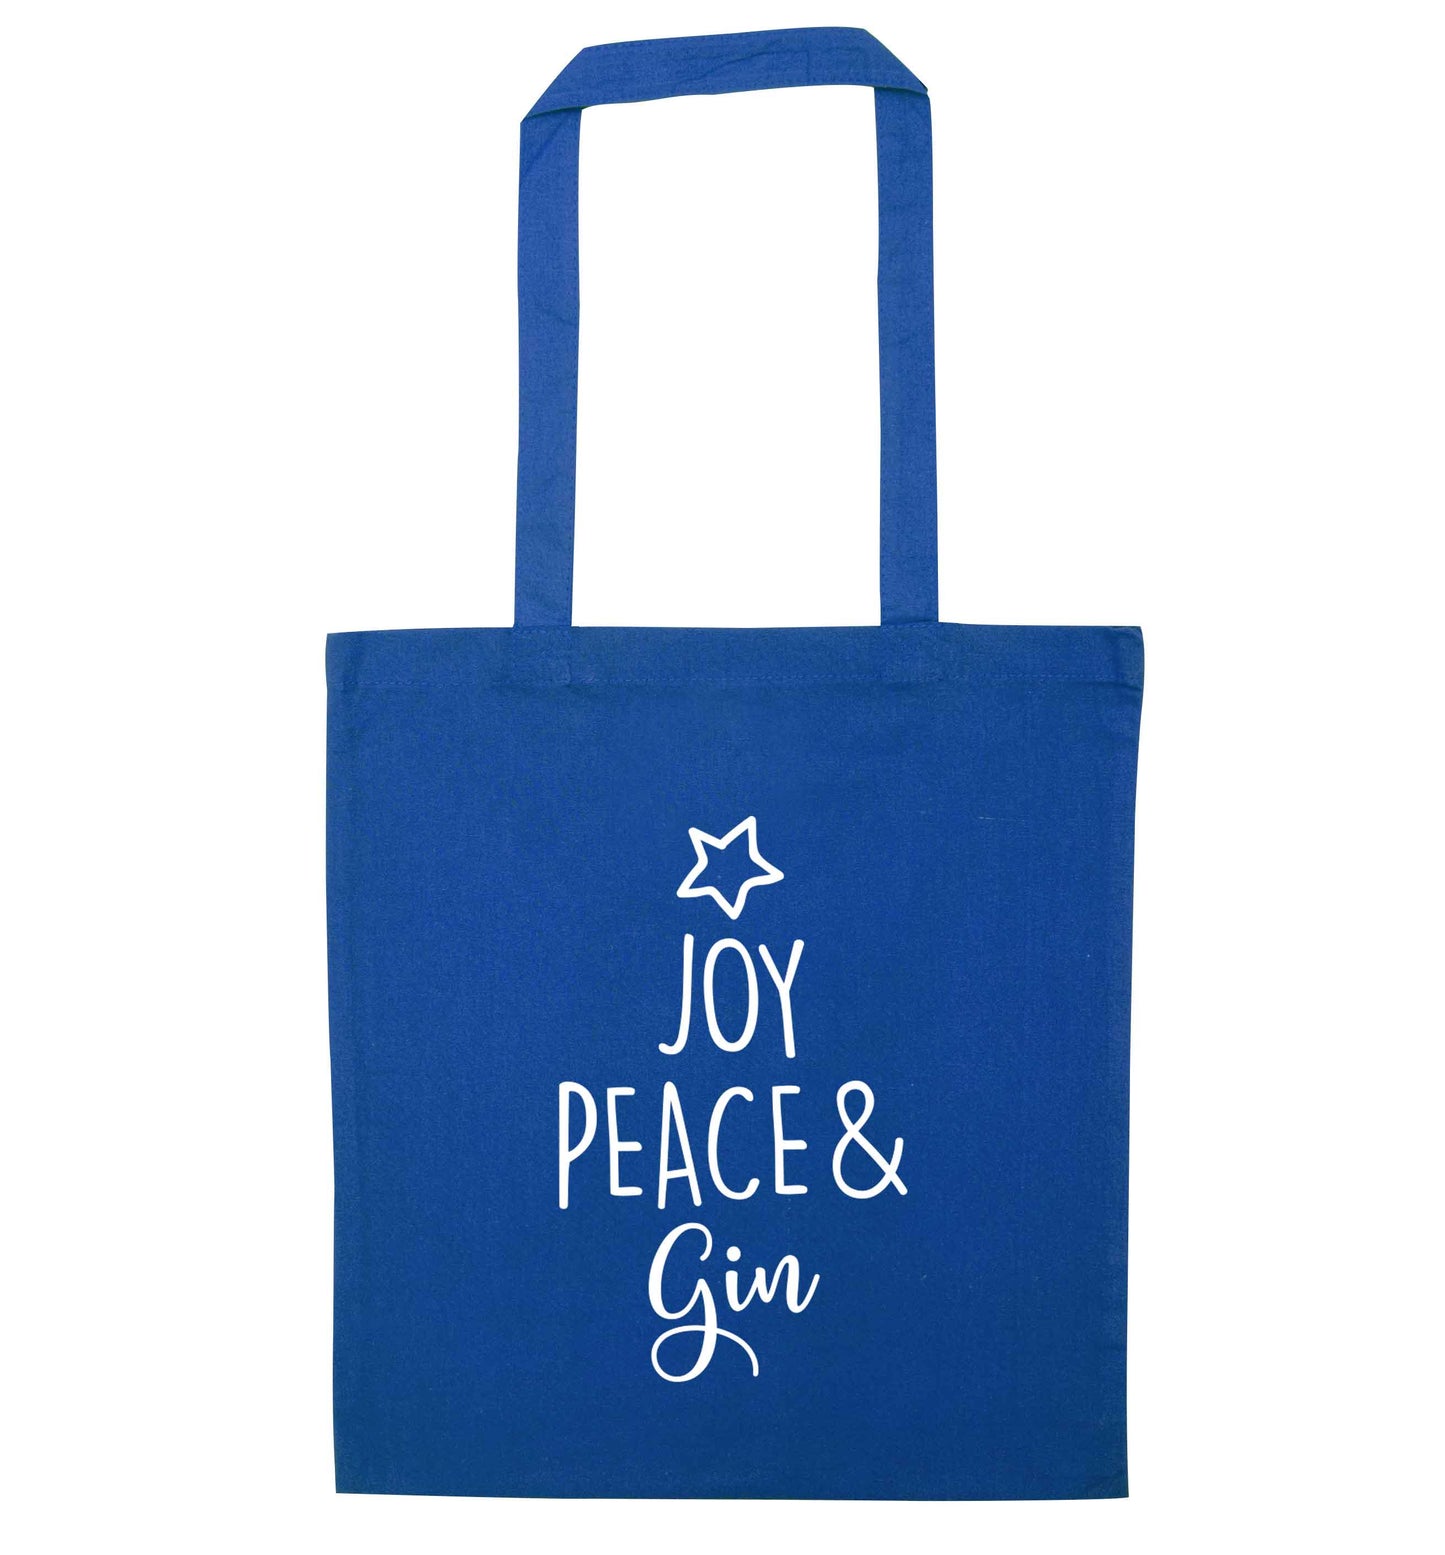 Joy peace and gin blue tote bag